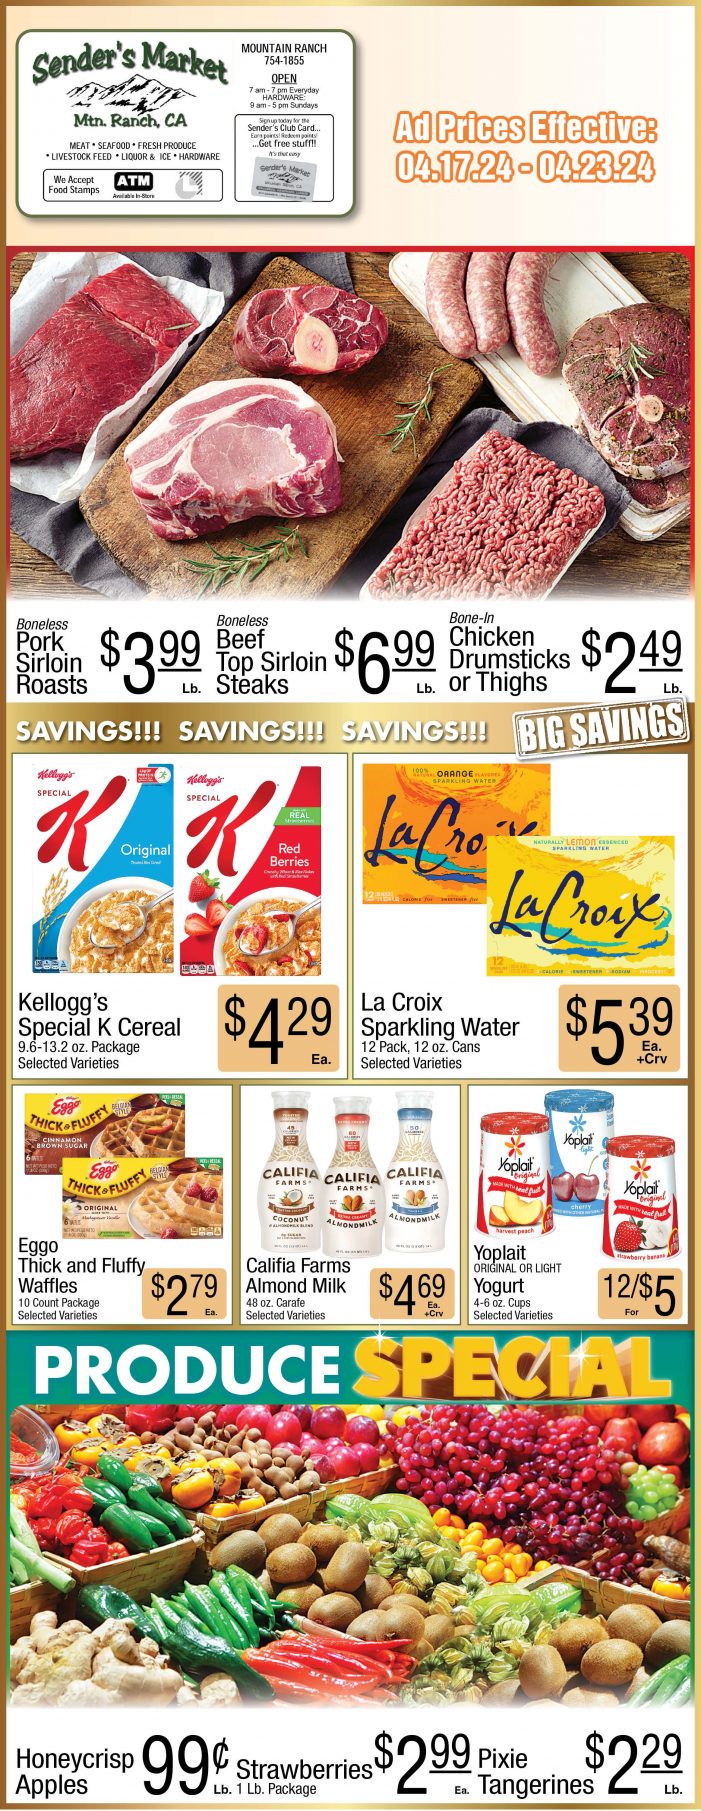 Sender’s Market Weekly Ad & Grocery Specials Through April 23rd! Shop Local & Save!!